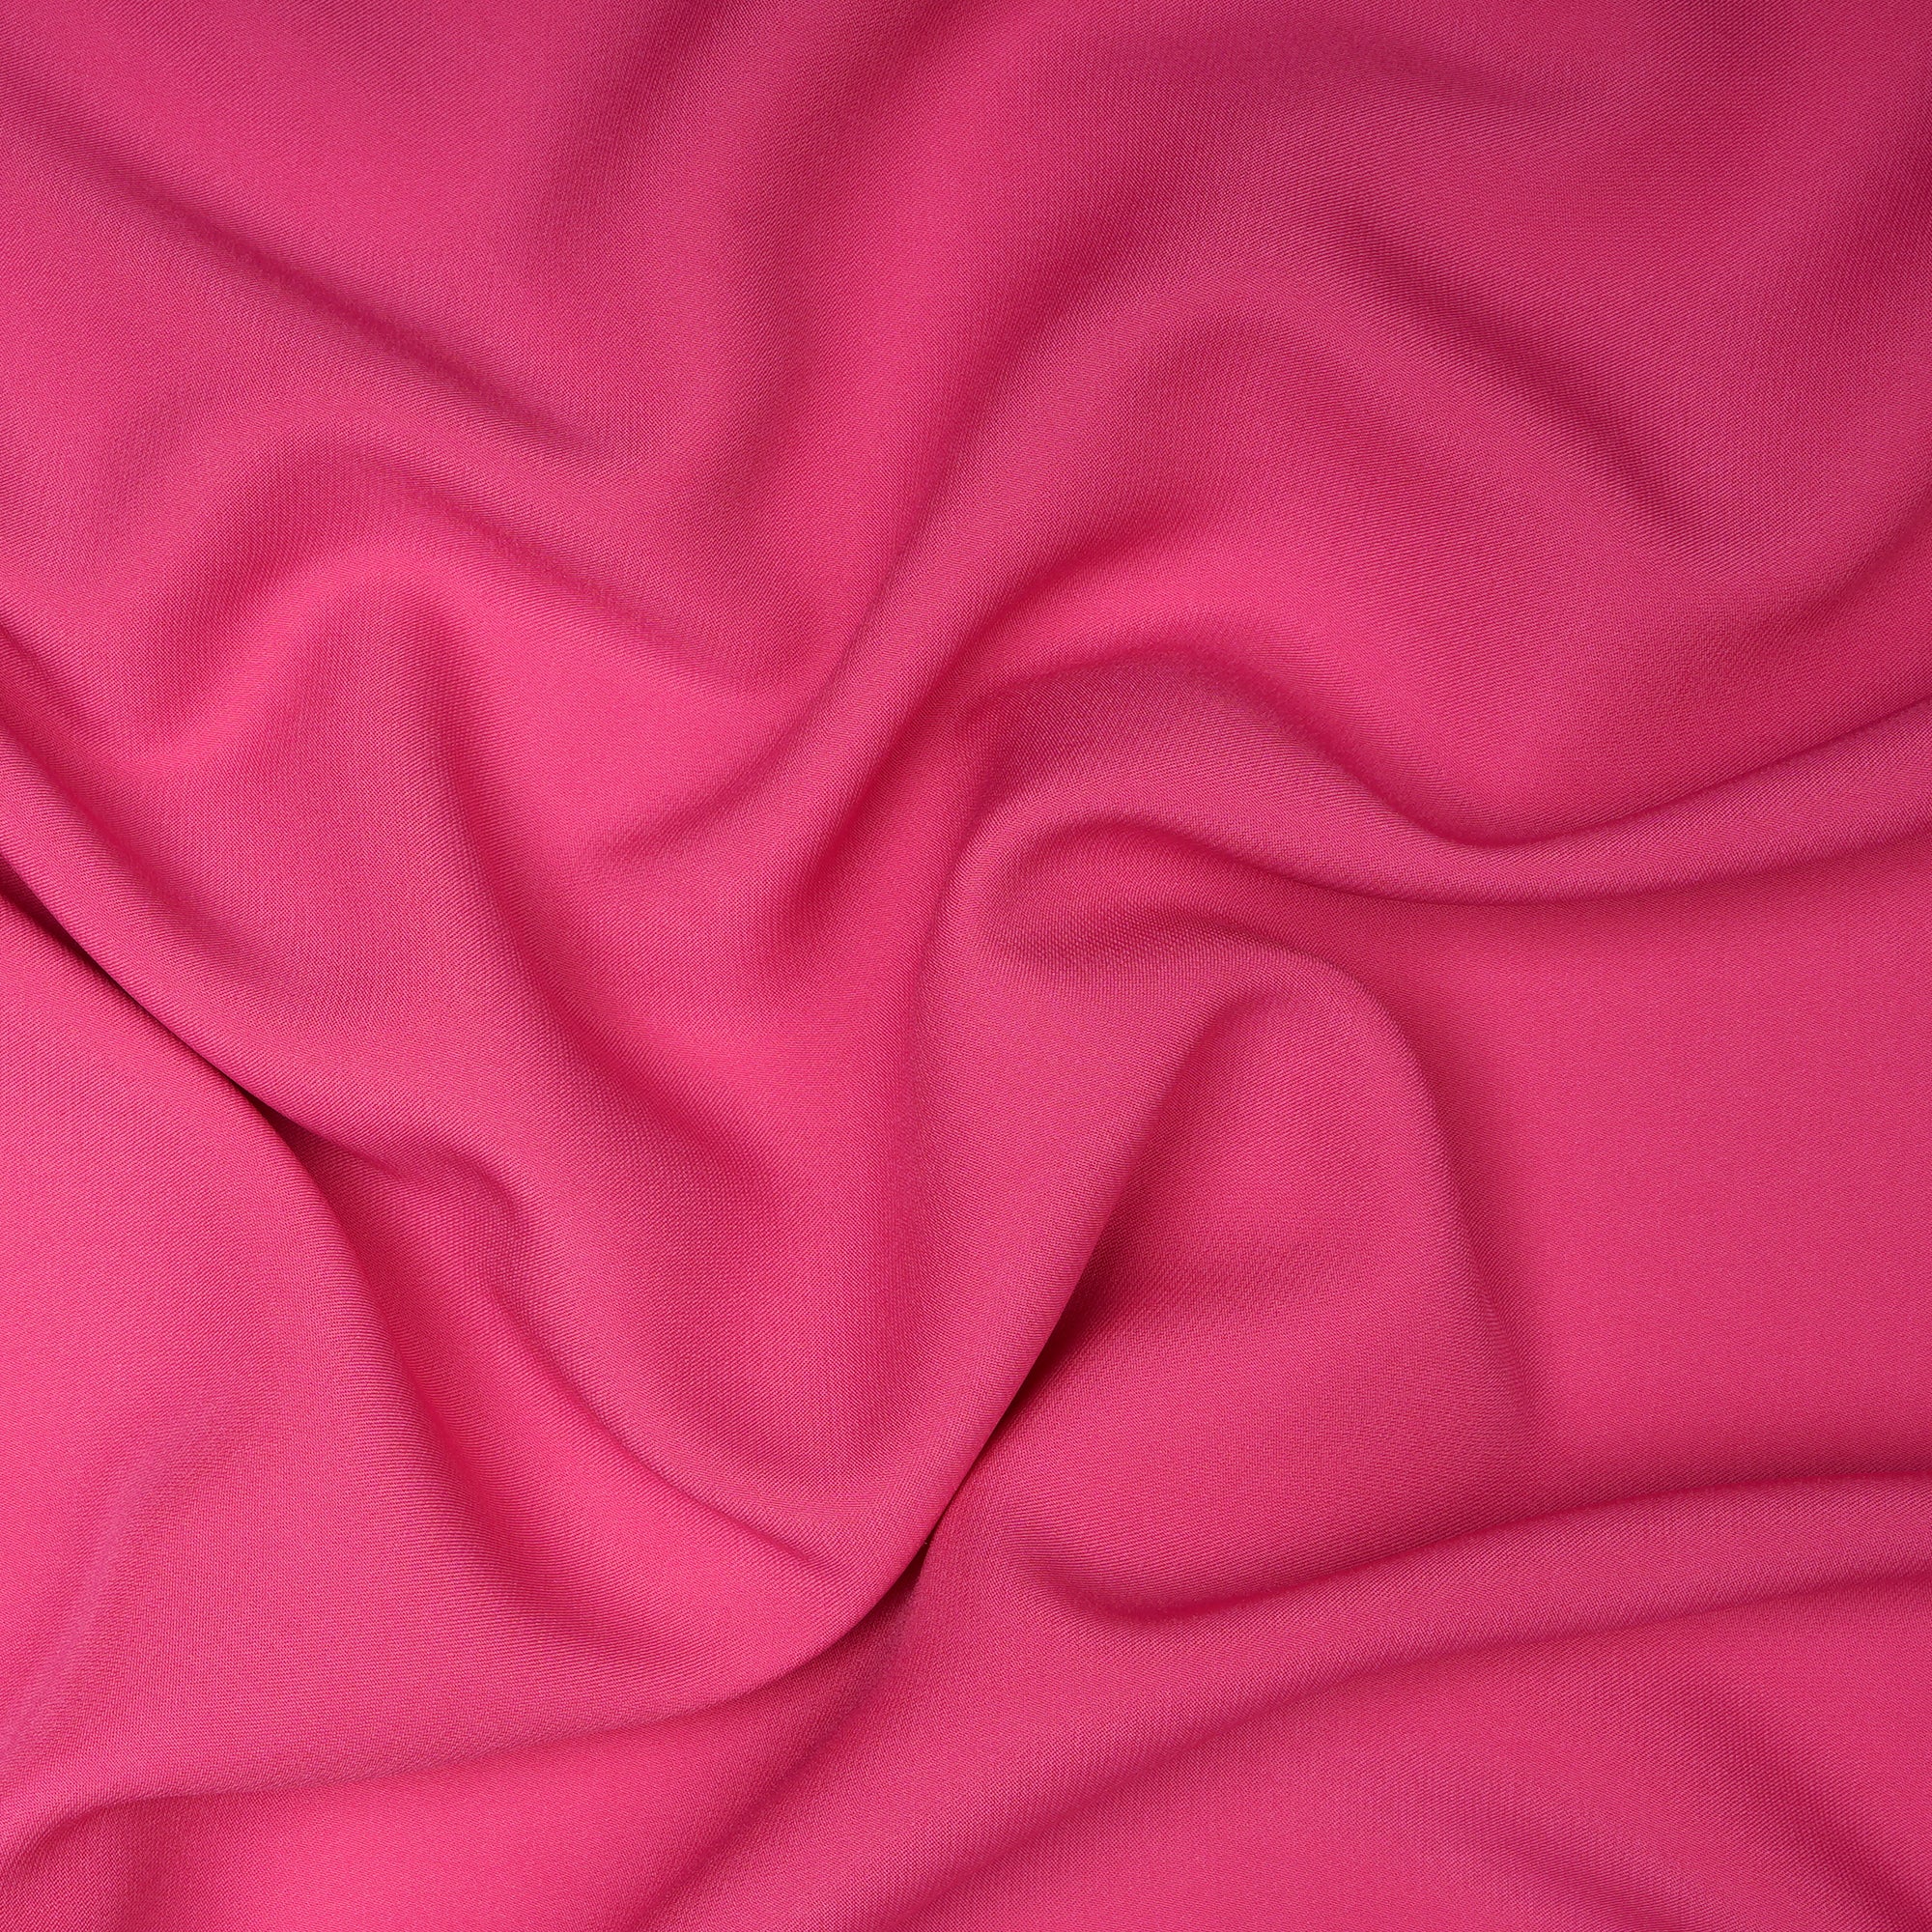 Carmine Rose Solid Dyed Imported Armani Satin Fabric (60" Width)